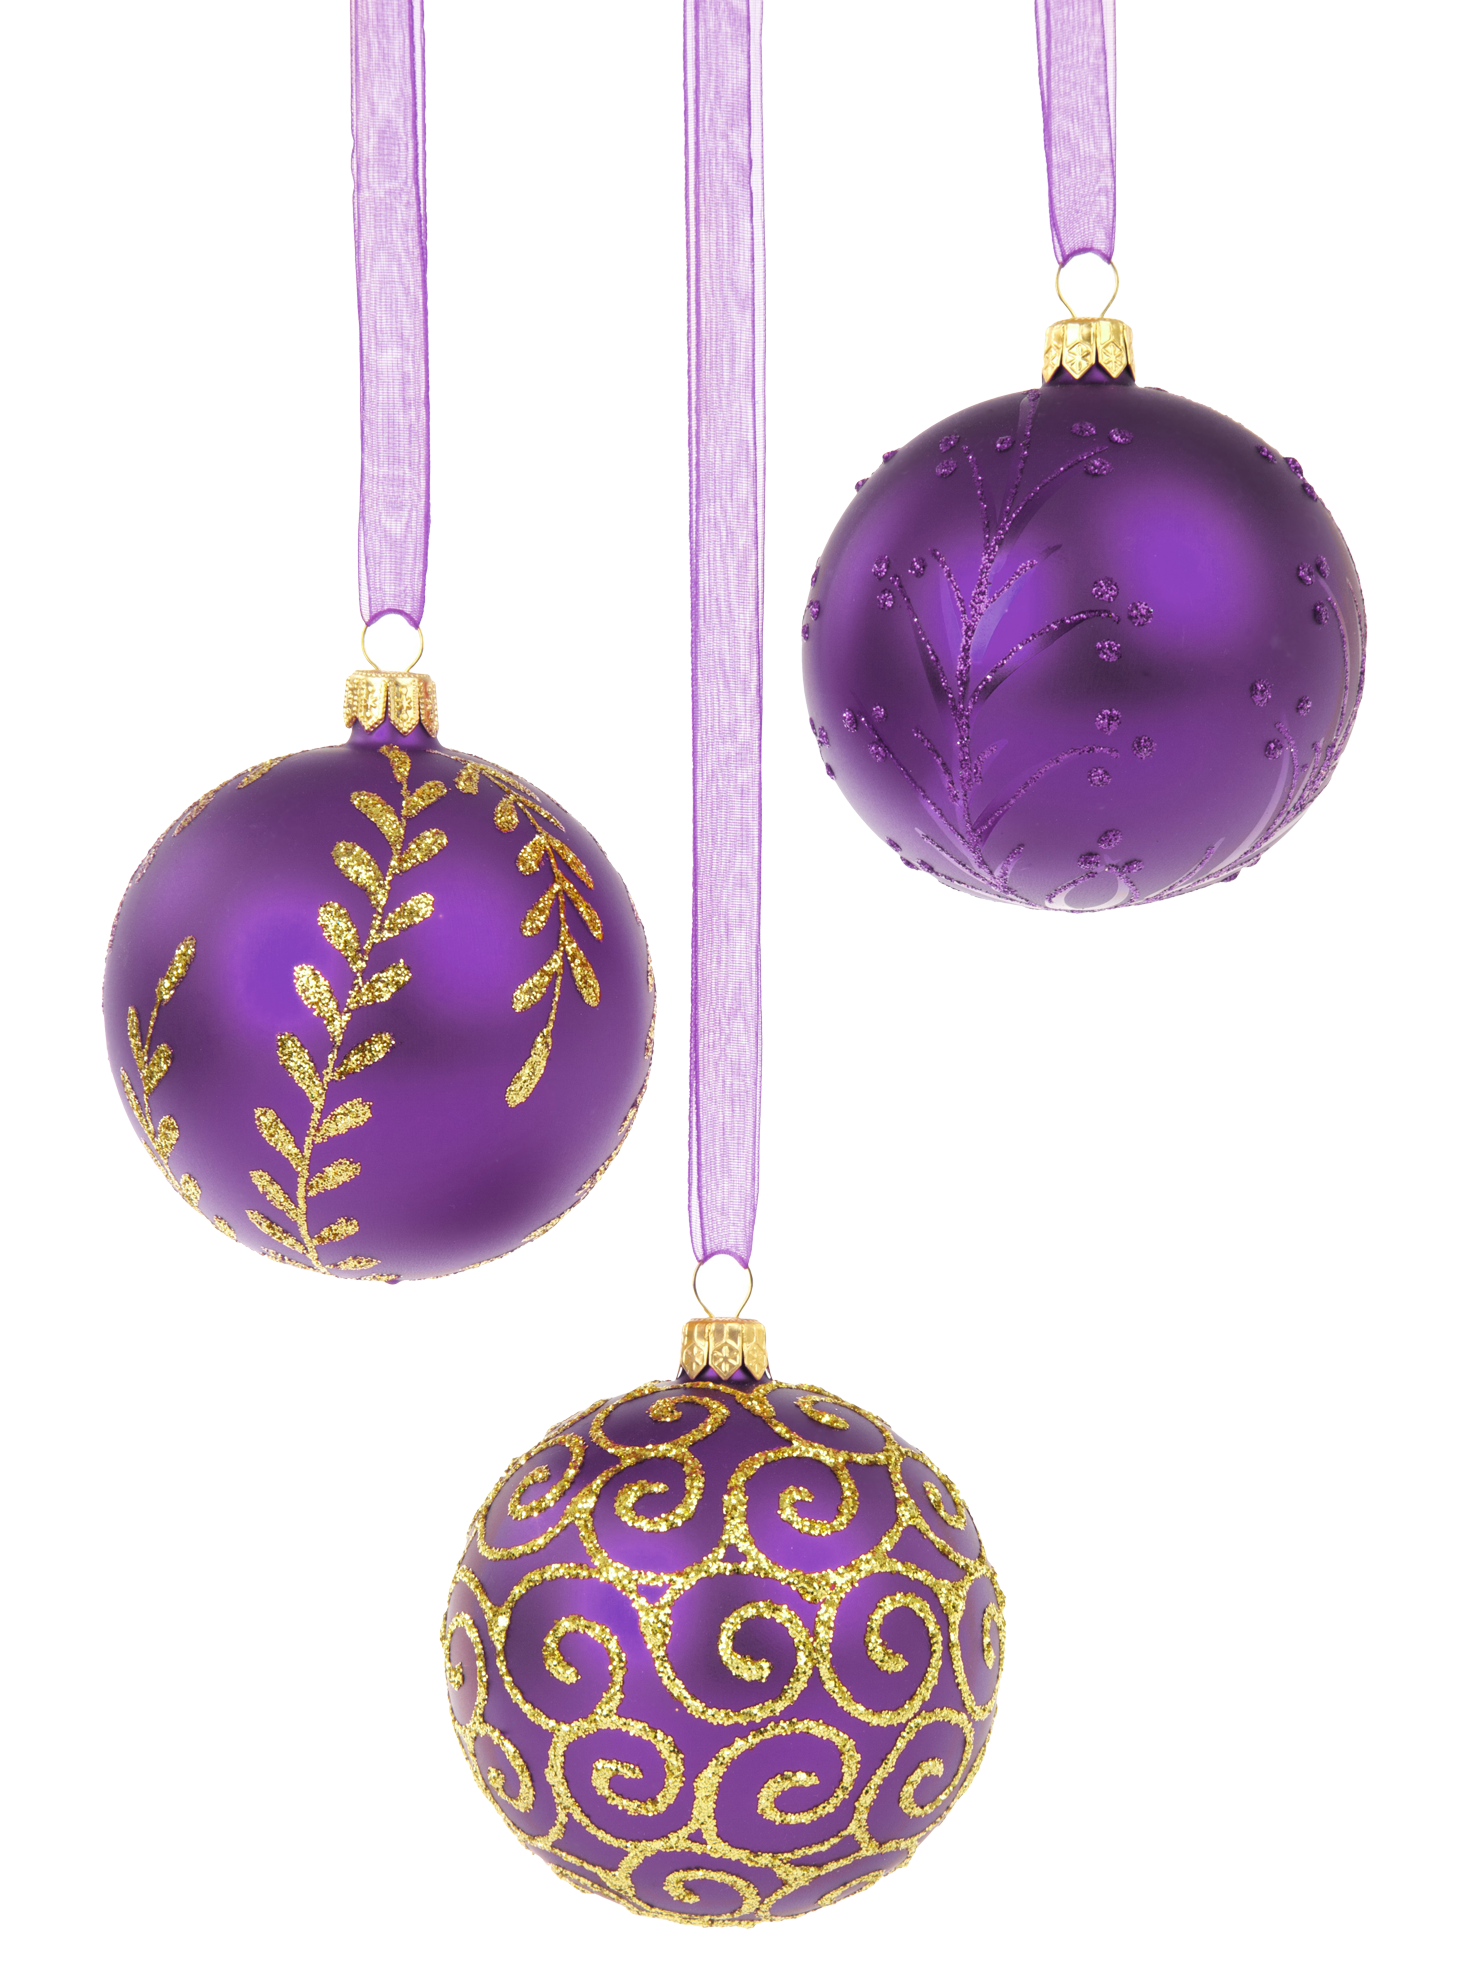 Christmas Baubles PNG Free Image